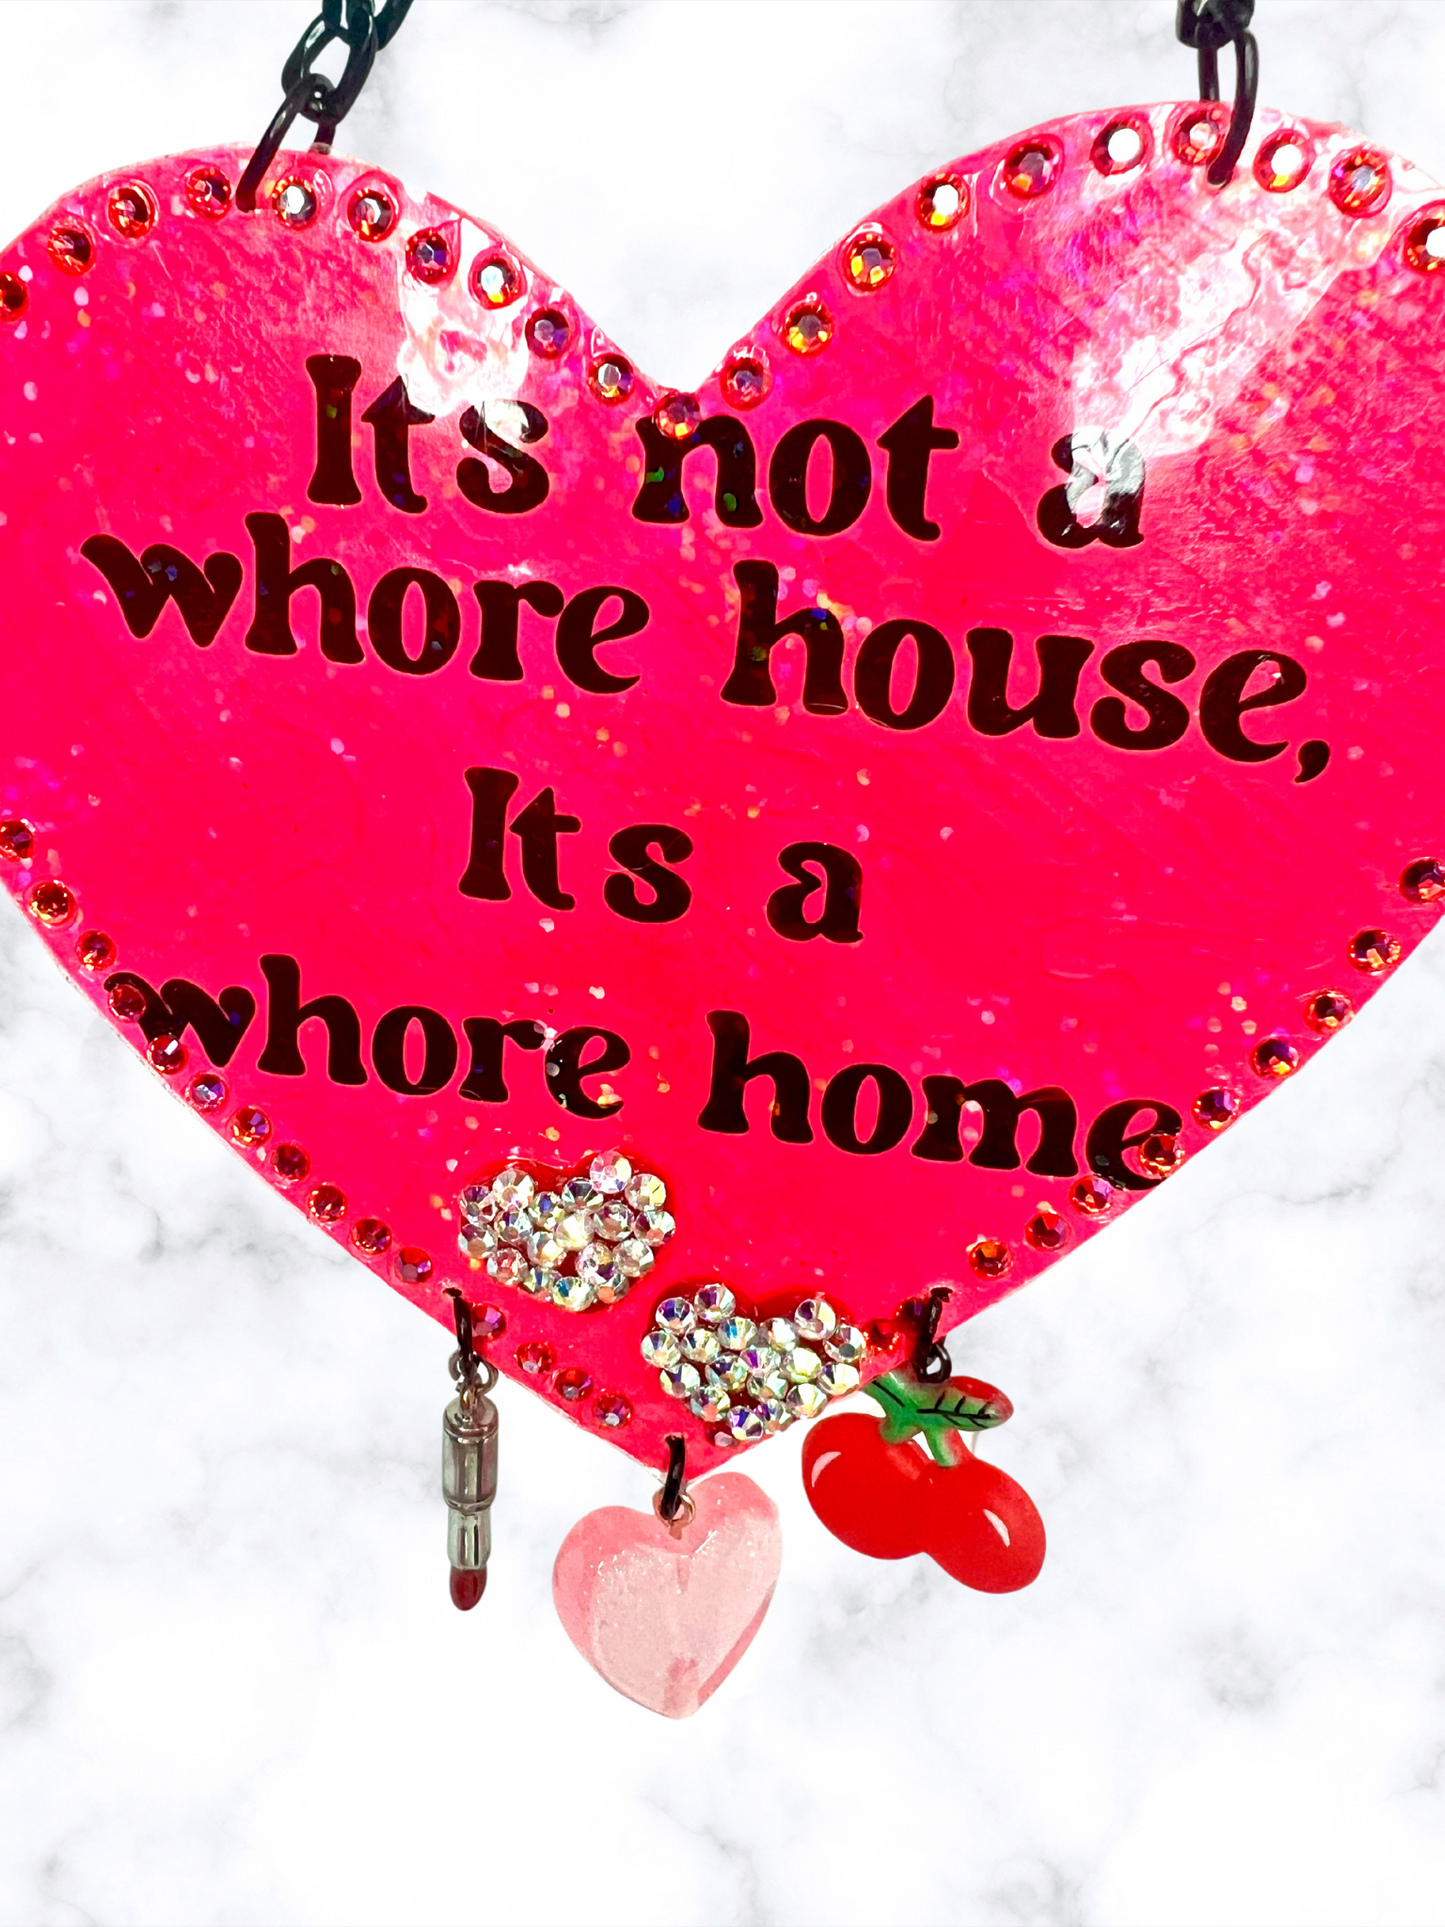 Best Little Whore House Wall Hanging